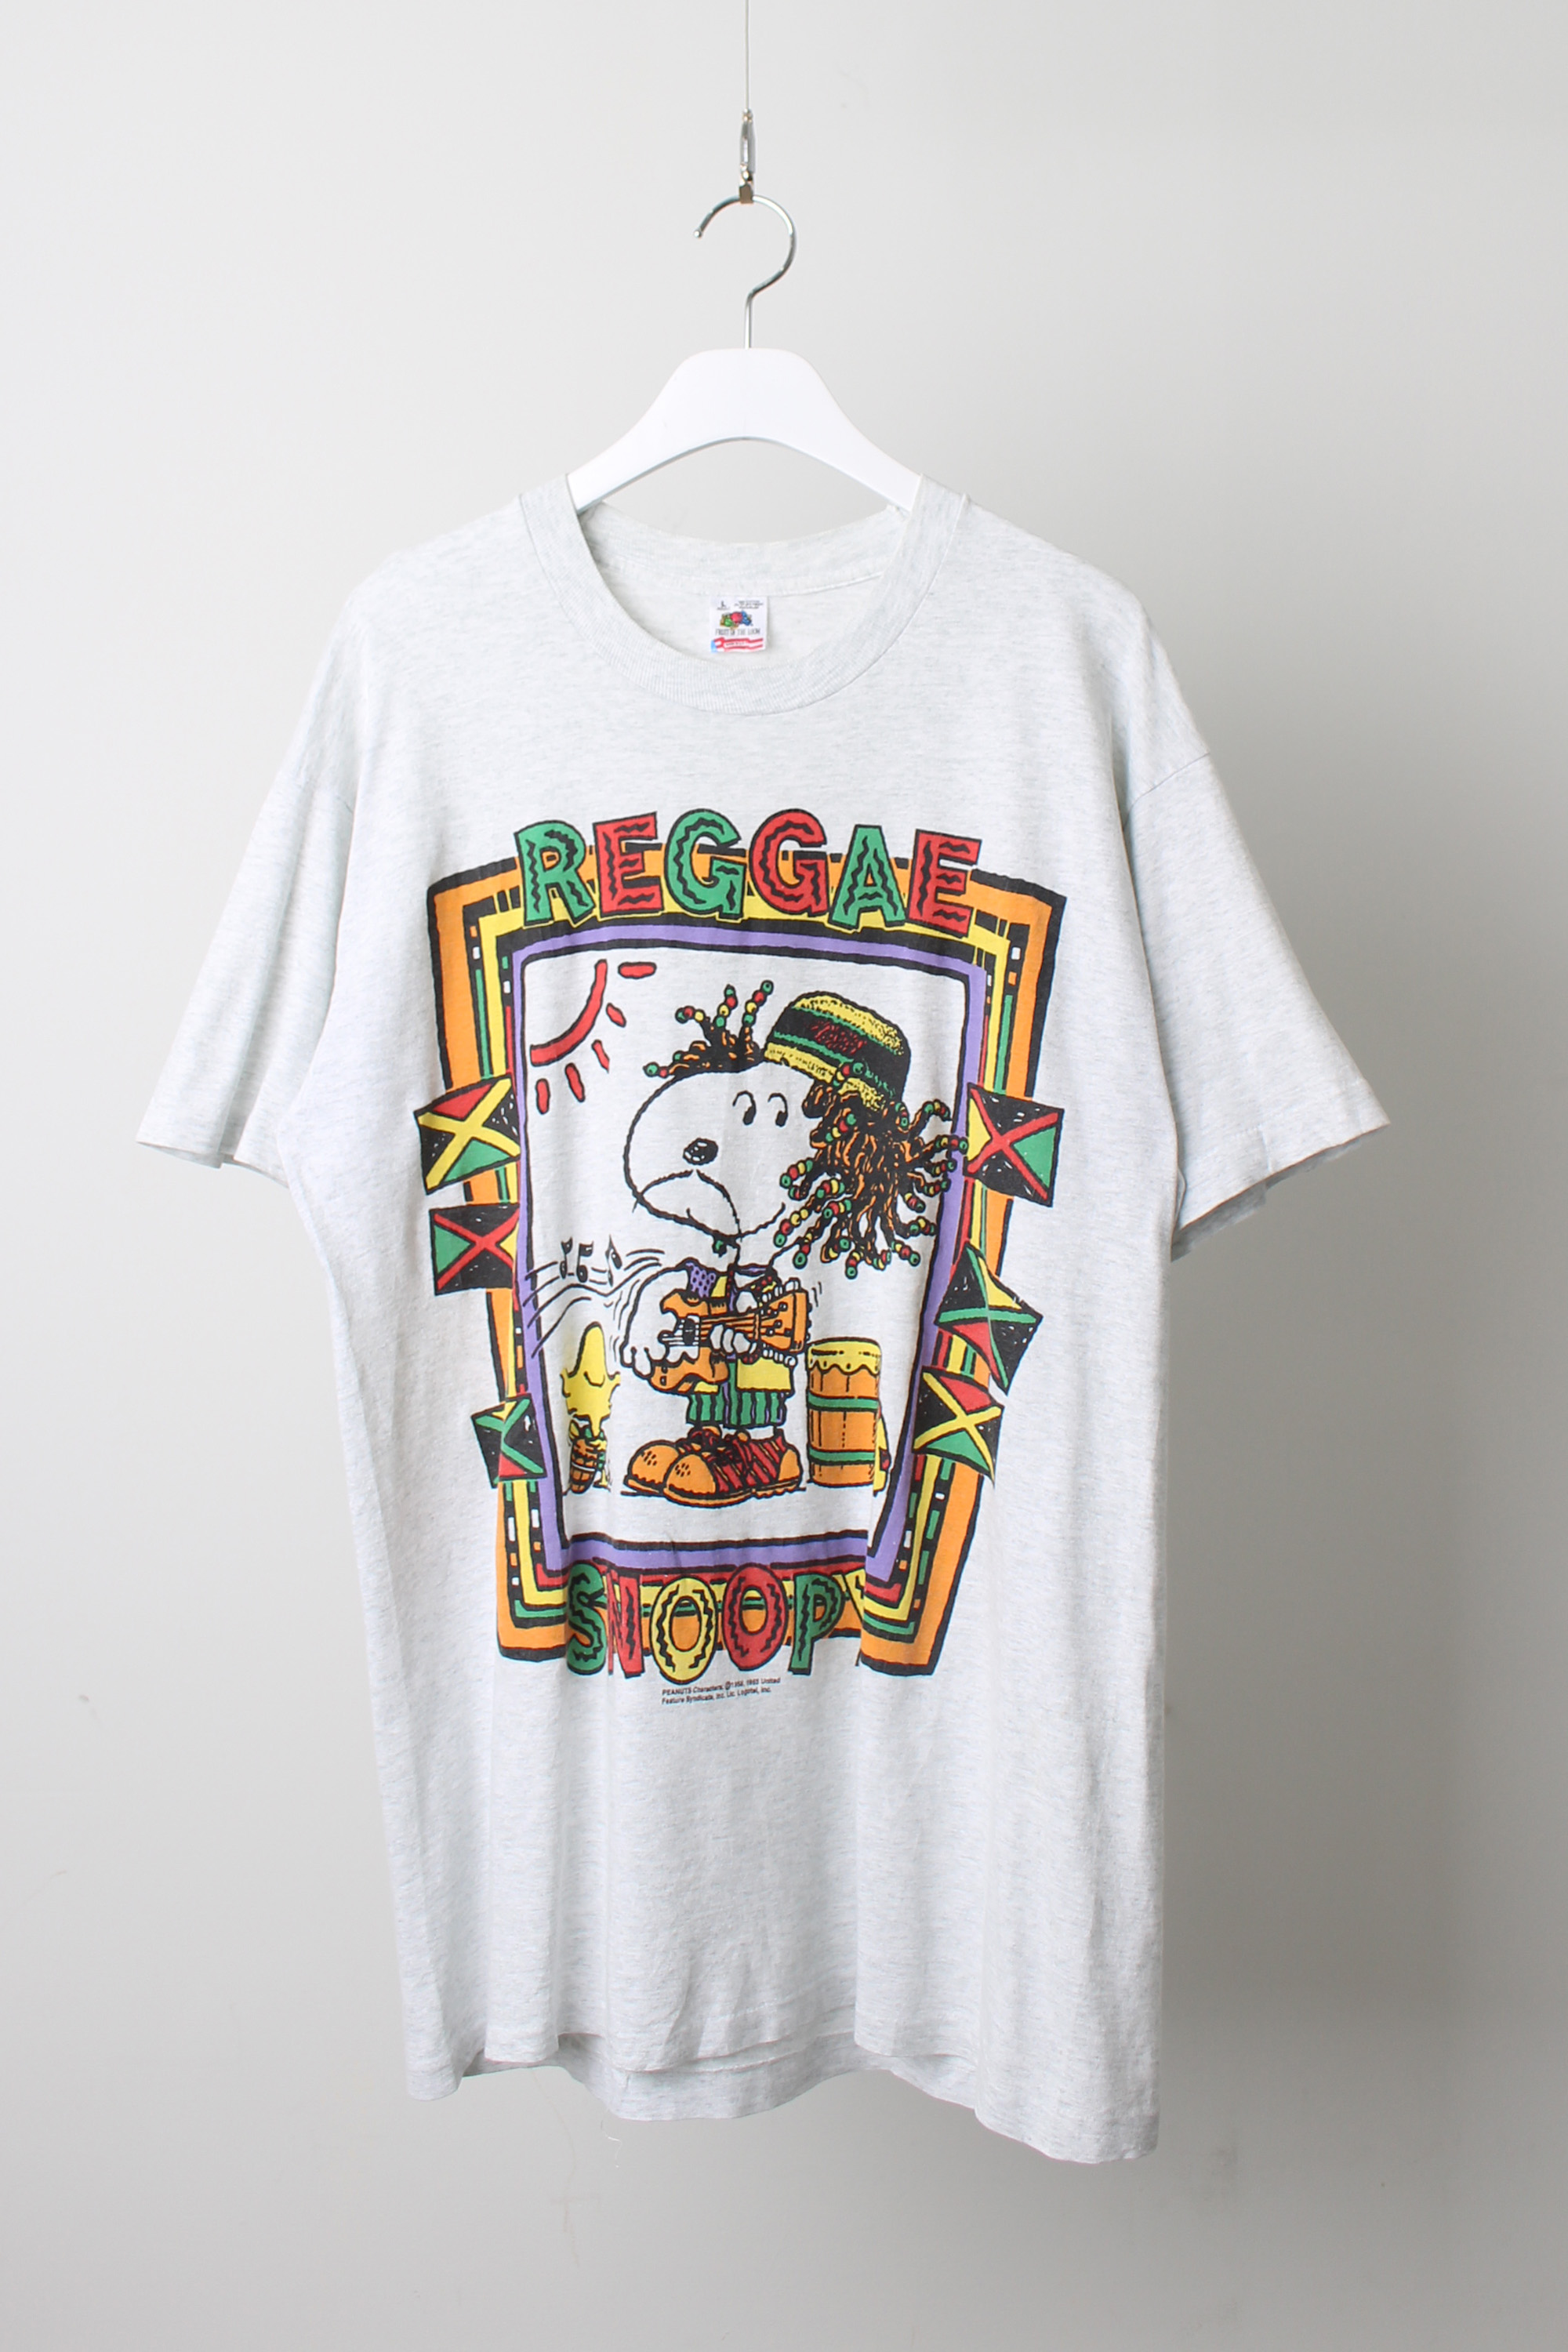 1990s Fruit of the Loom&quot;SNOOPY&quot; t-shirt